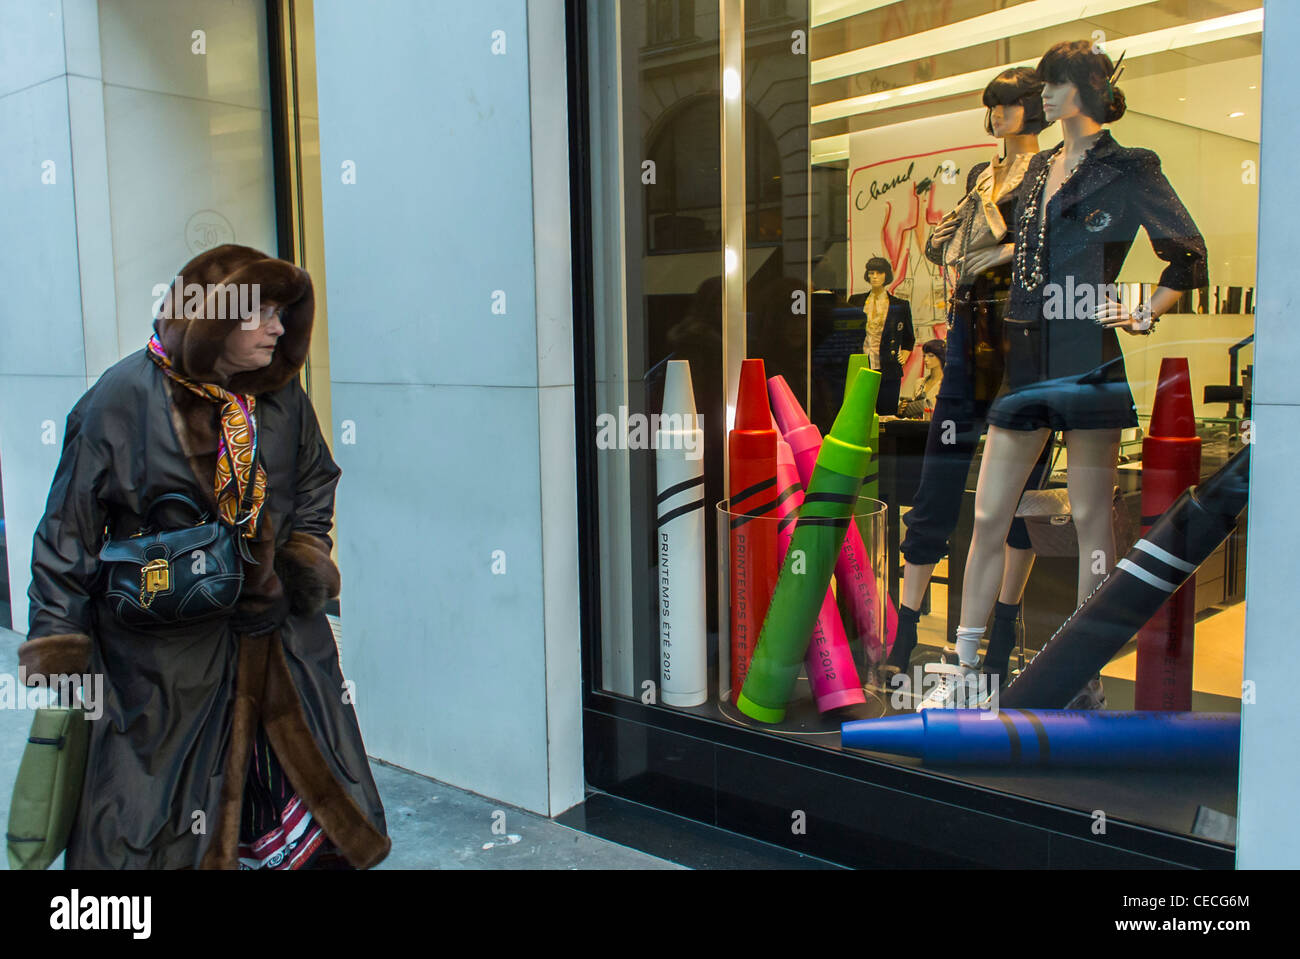 Facade of a Chanel store, shop, in Paris, France Stock Photo - Alamy